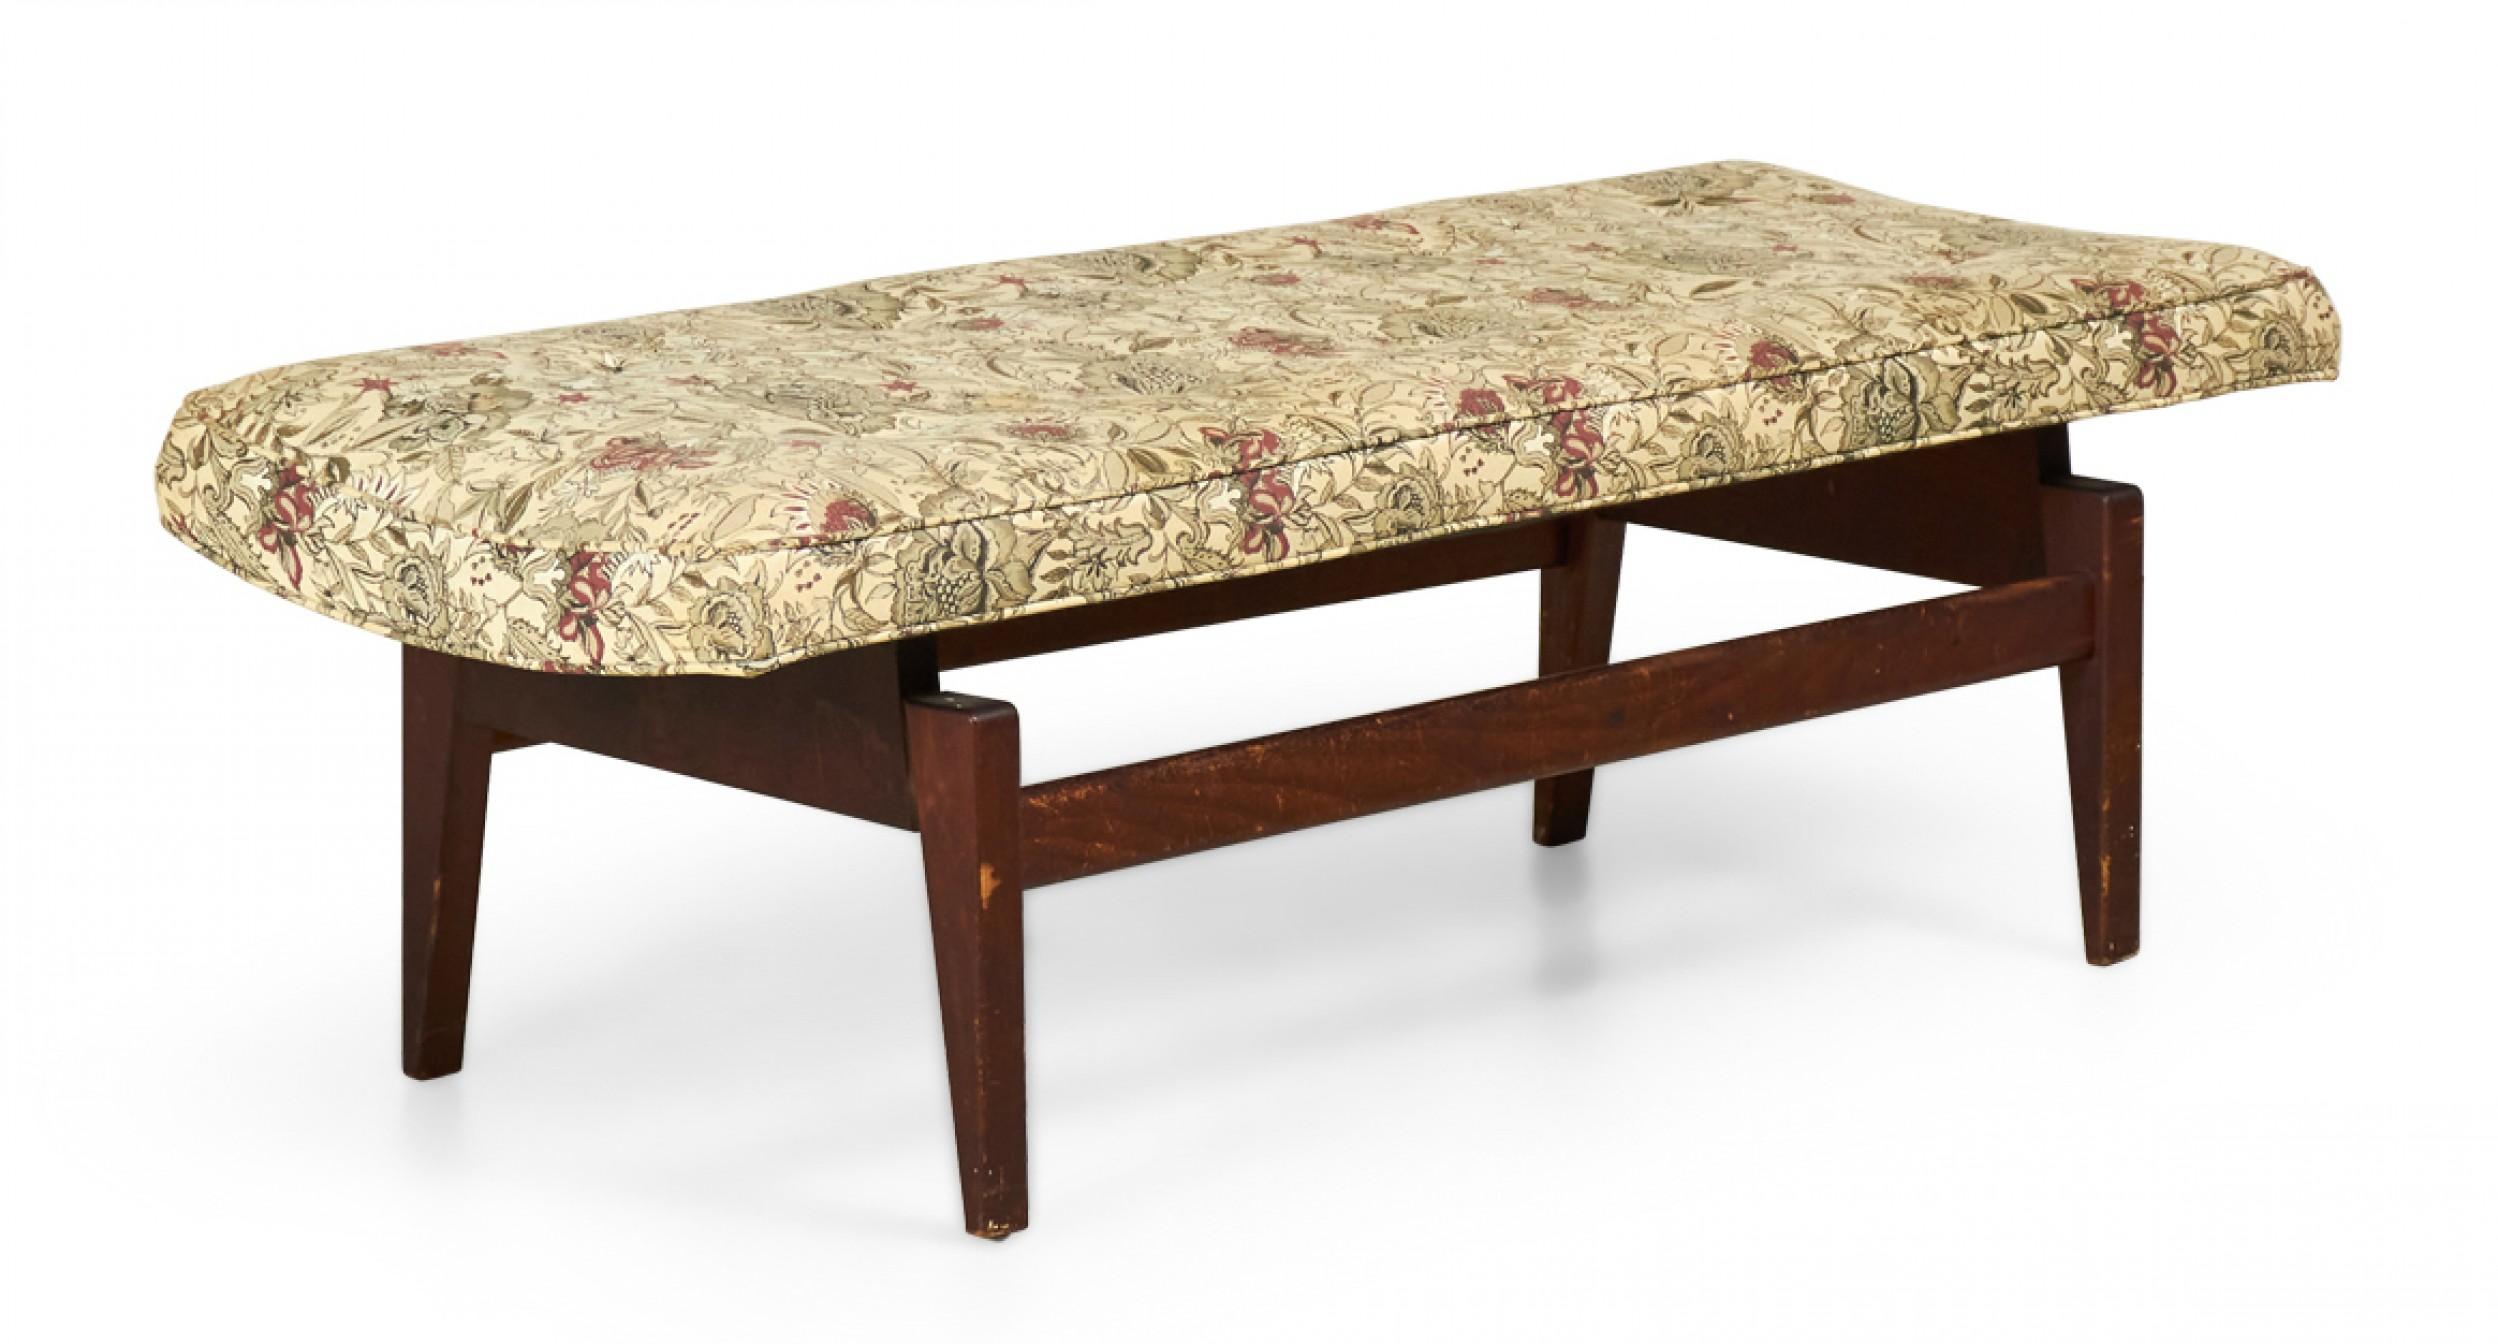 Jens Risom Danish Floating Stained Walnut and Floral Upholstered Bench For Sale 1